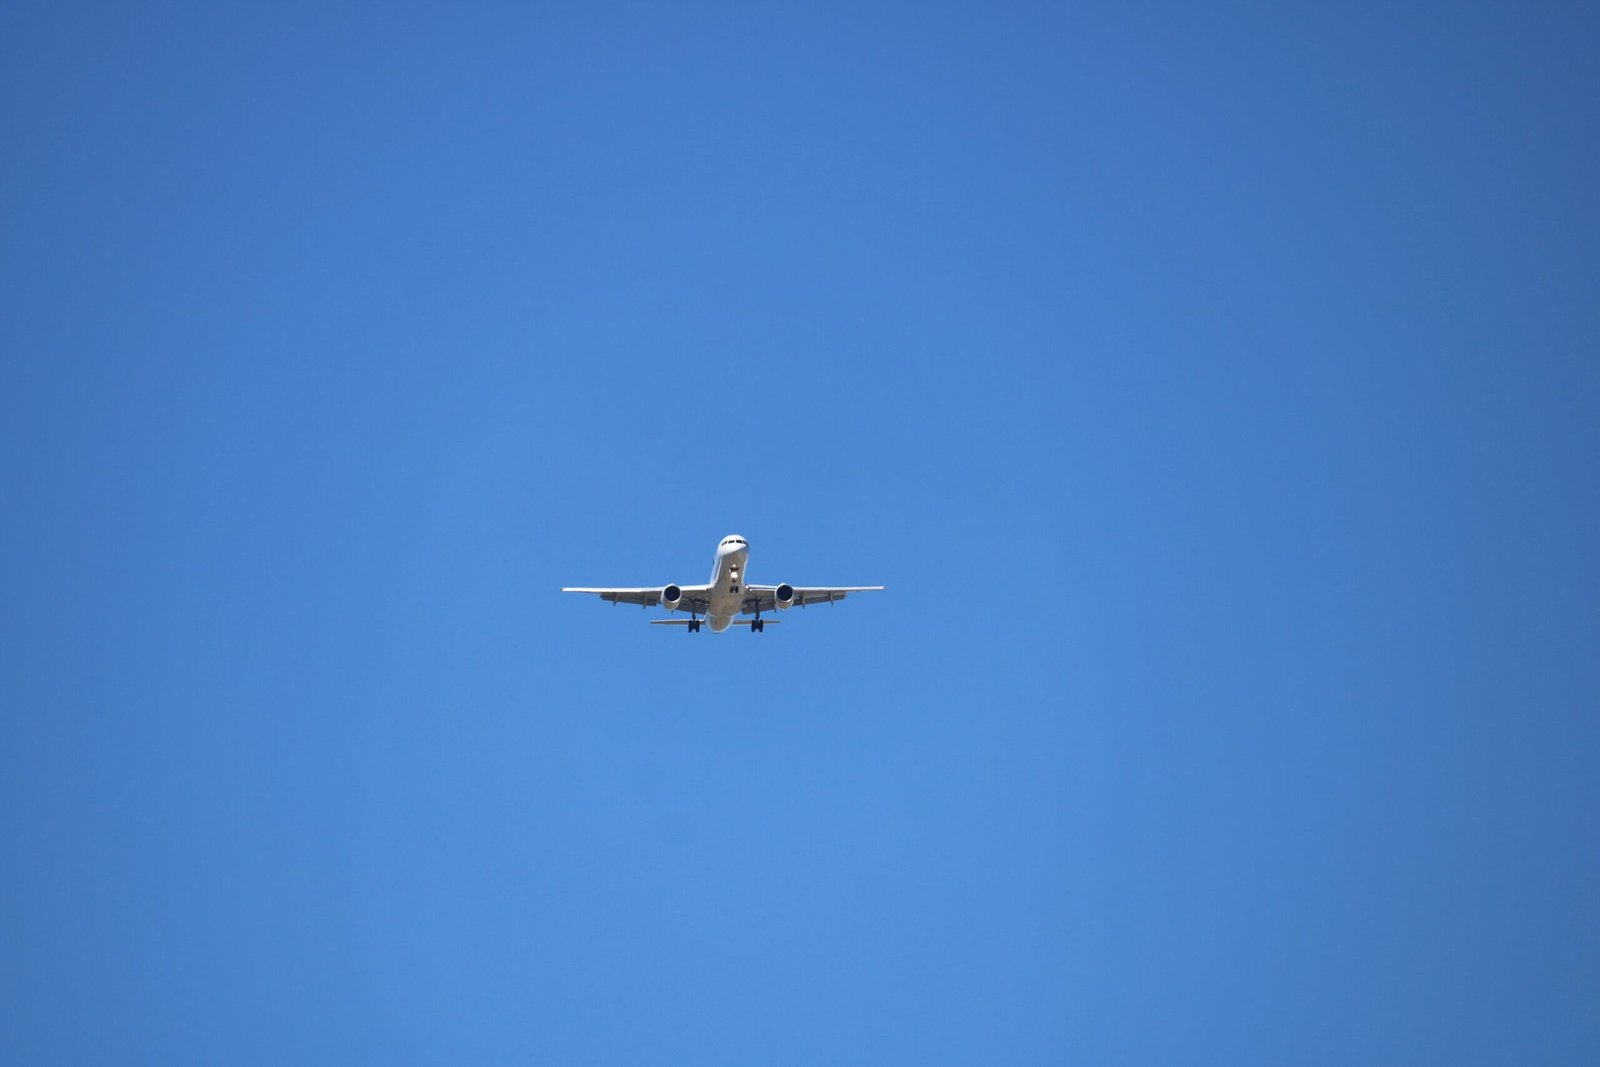 Low angle photography of gray airplane under blue sky at daytime